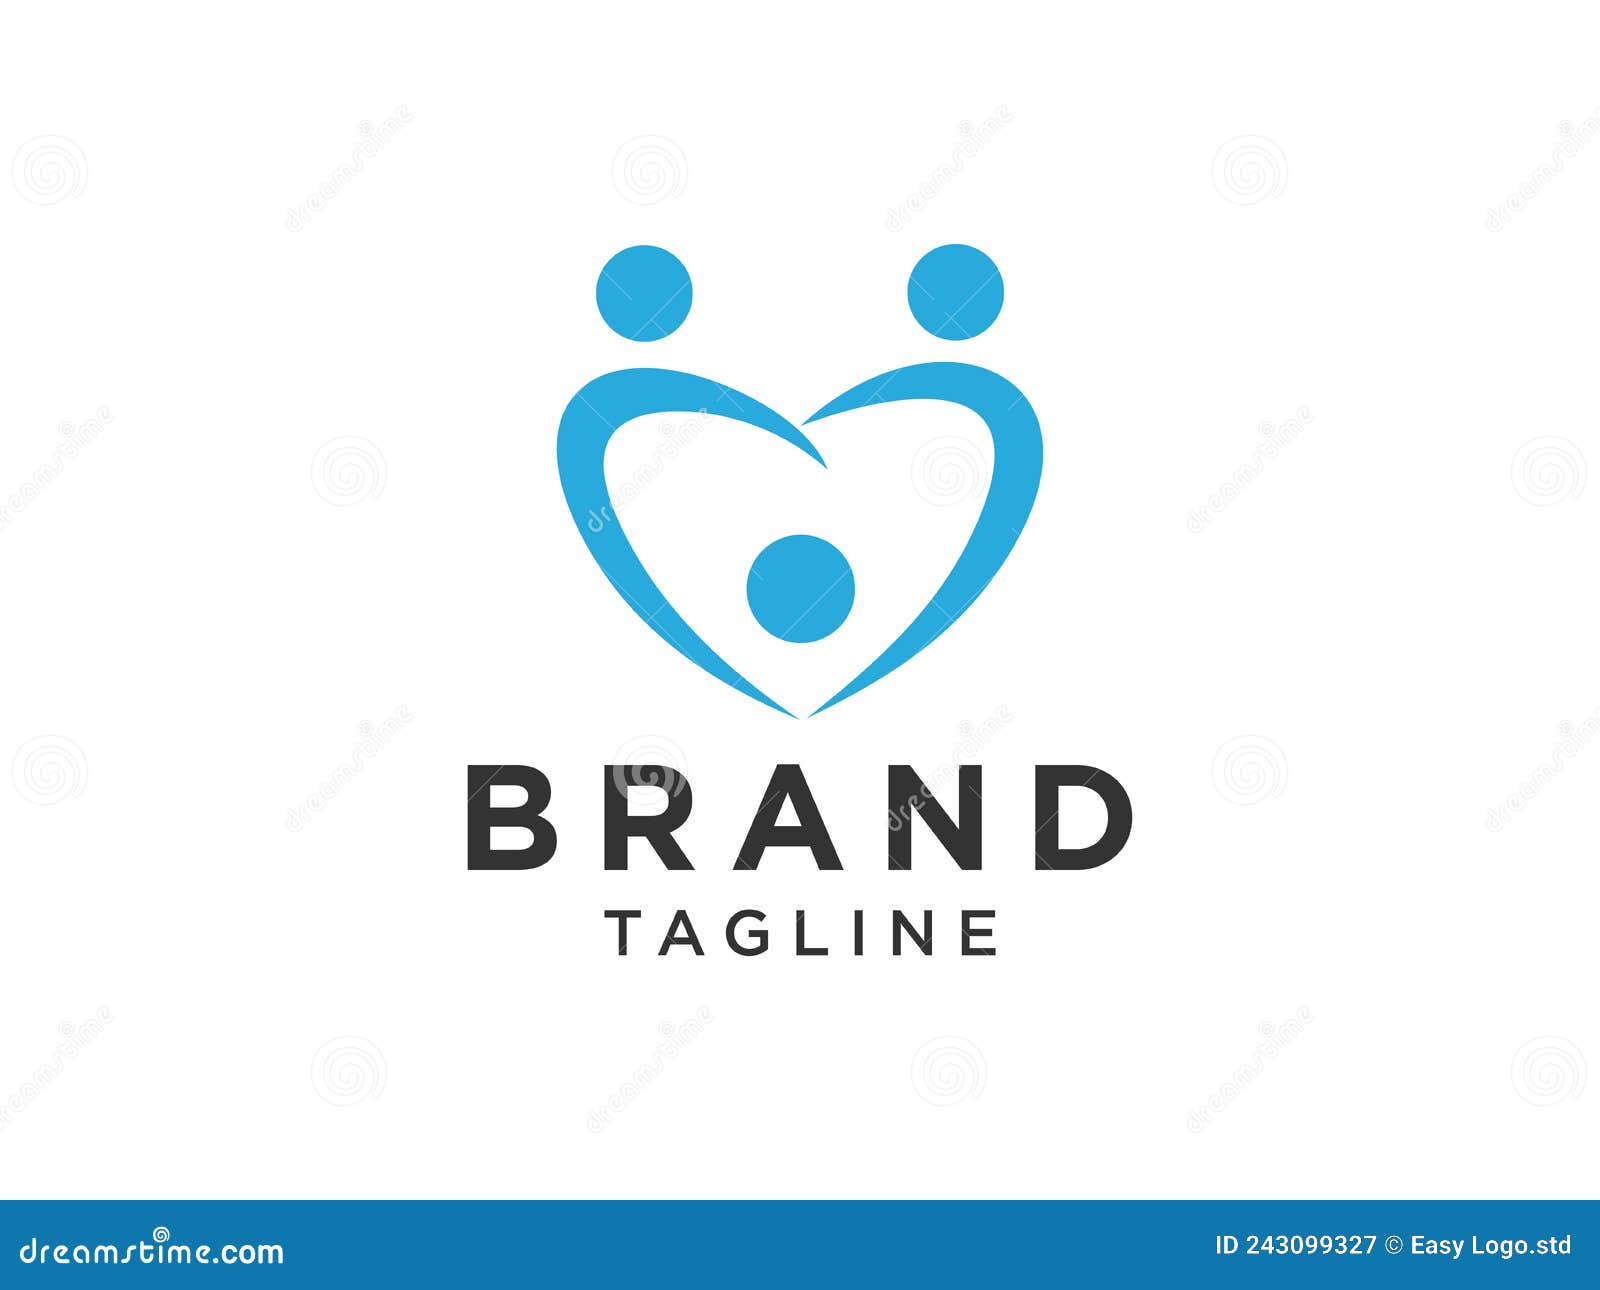 Abstract Family Care Logo. Blue Monoline Heart Icon with People Symbol ...